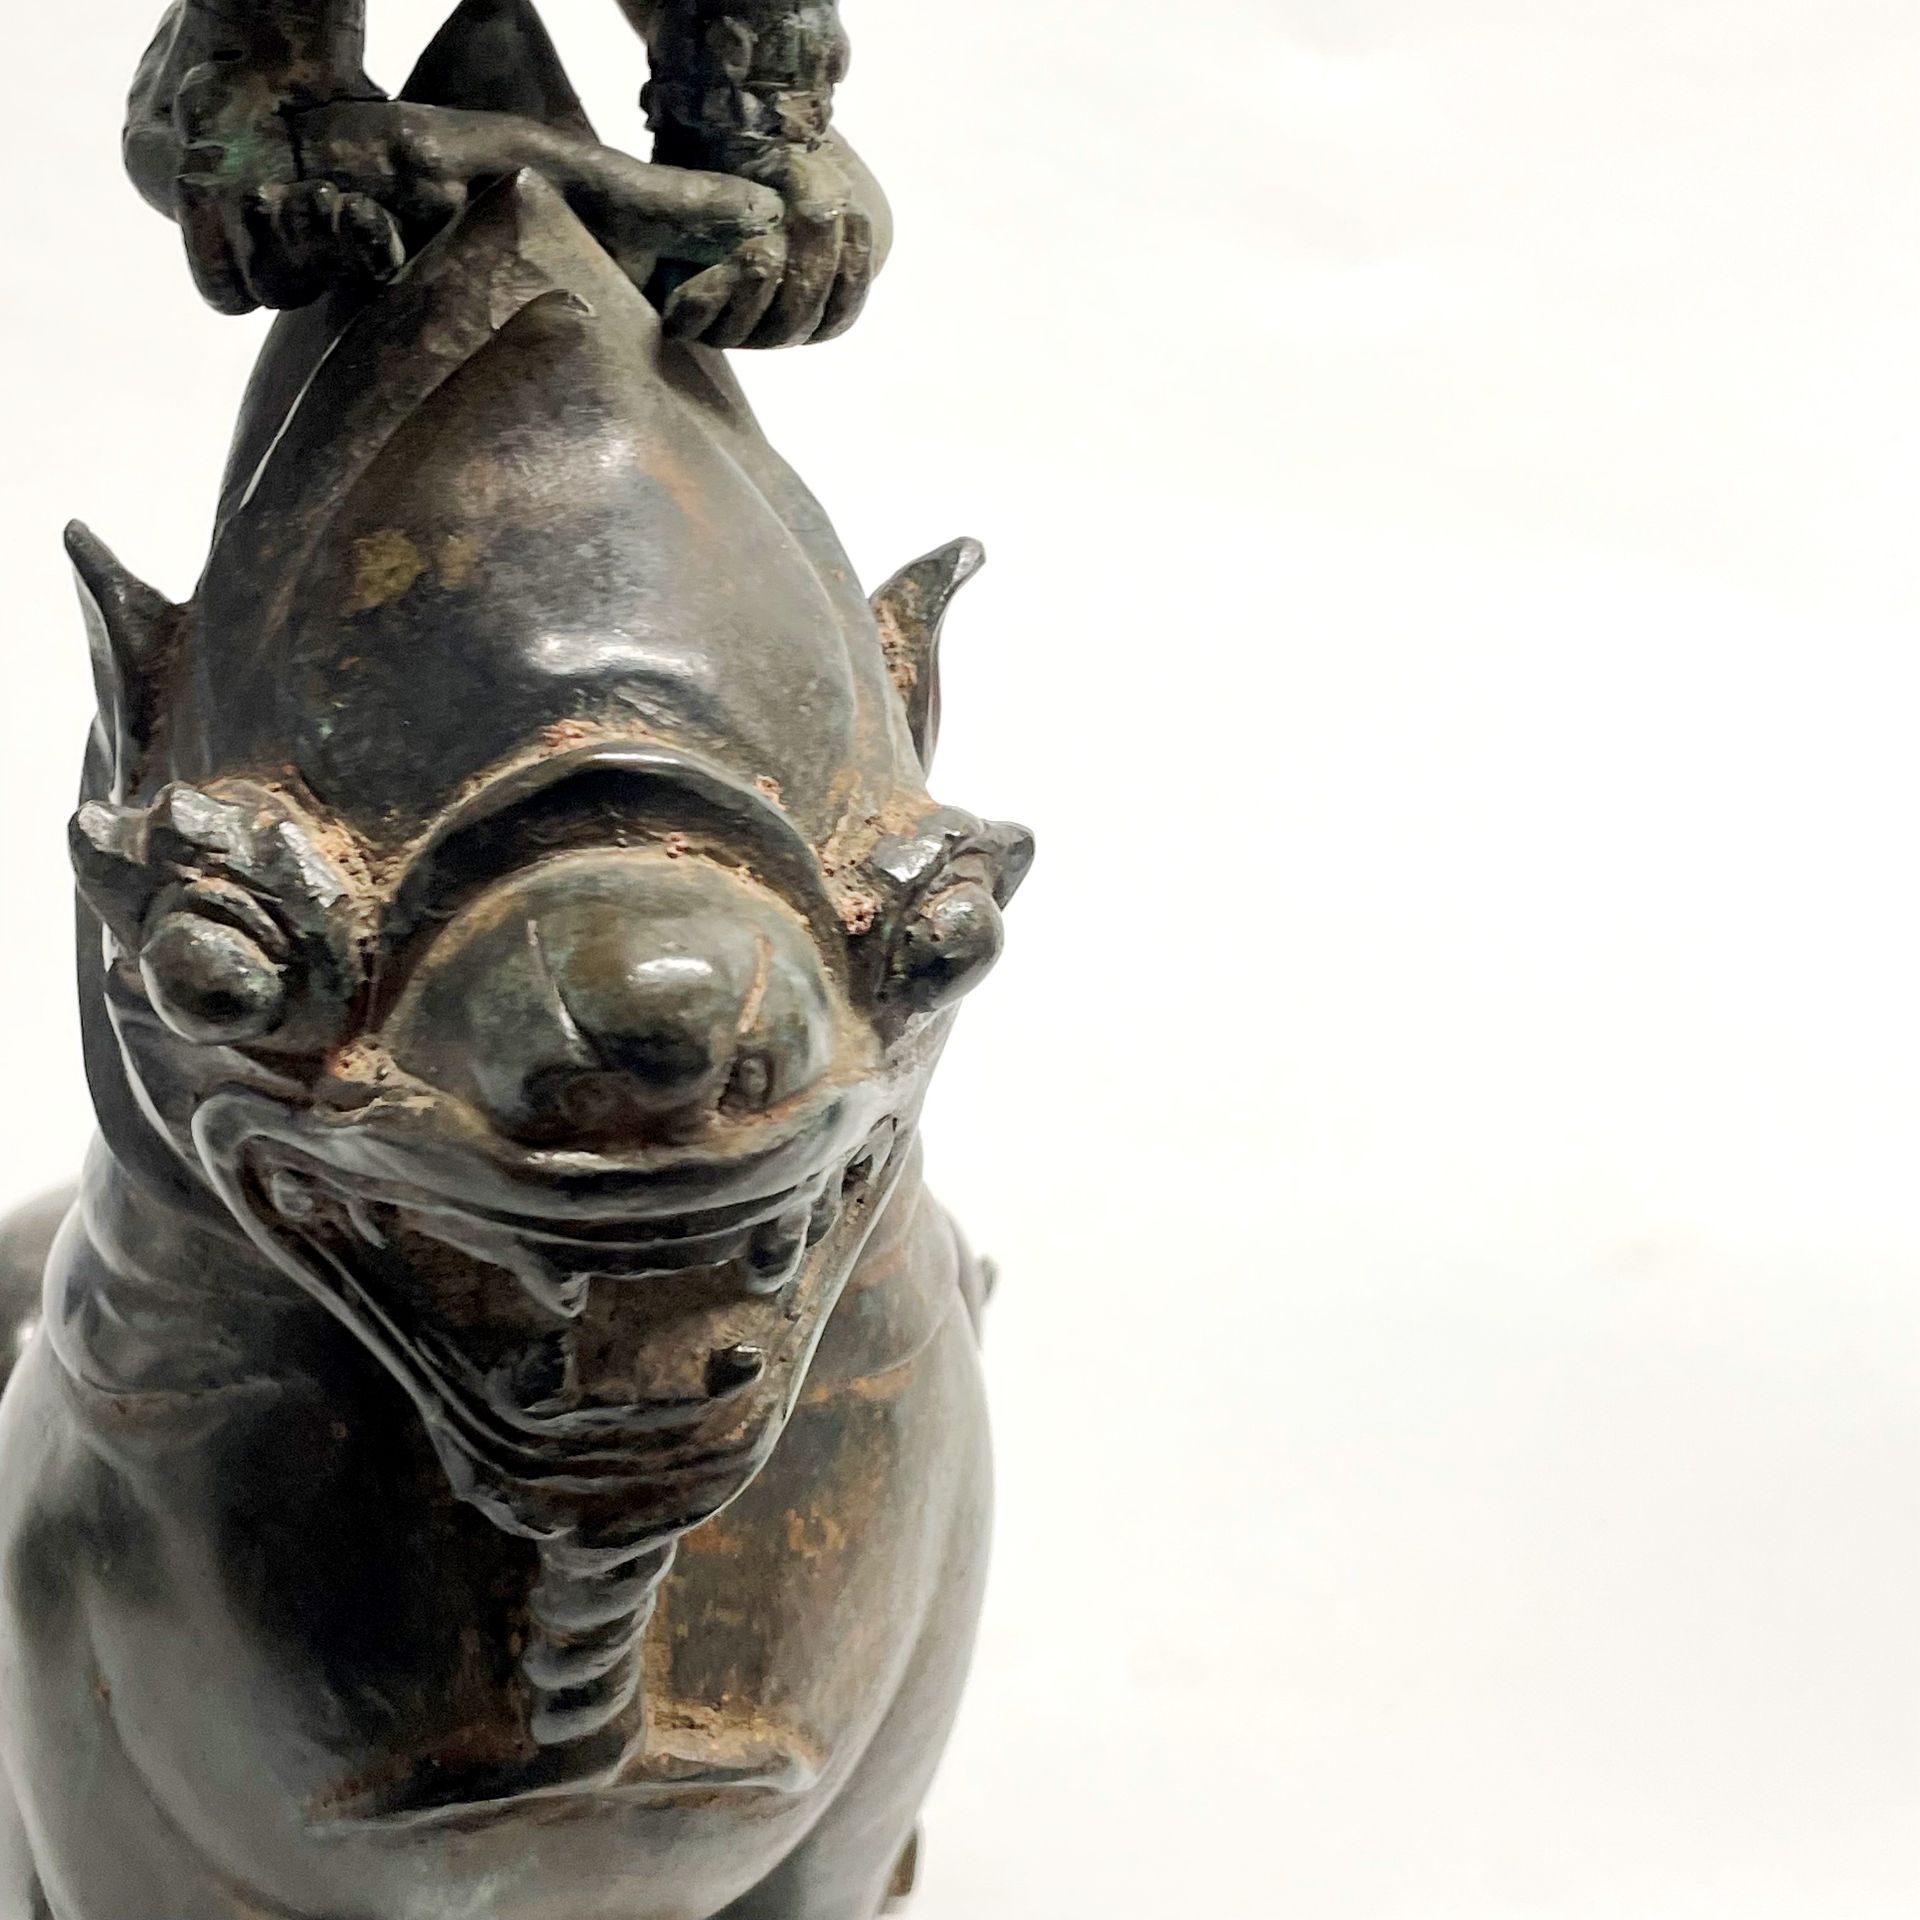 A pair of large Chinese bronze mythical animal pricket candlesticks featuring liondogs performing - Image 5 of 5